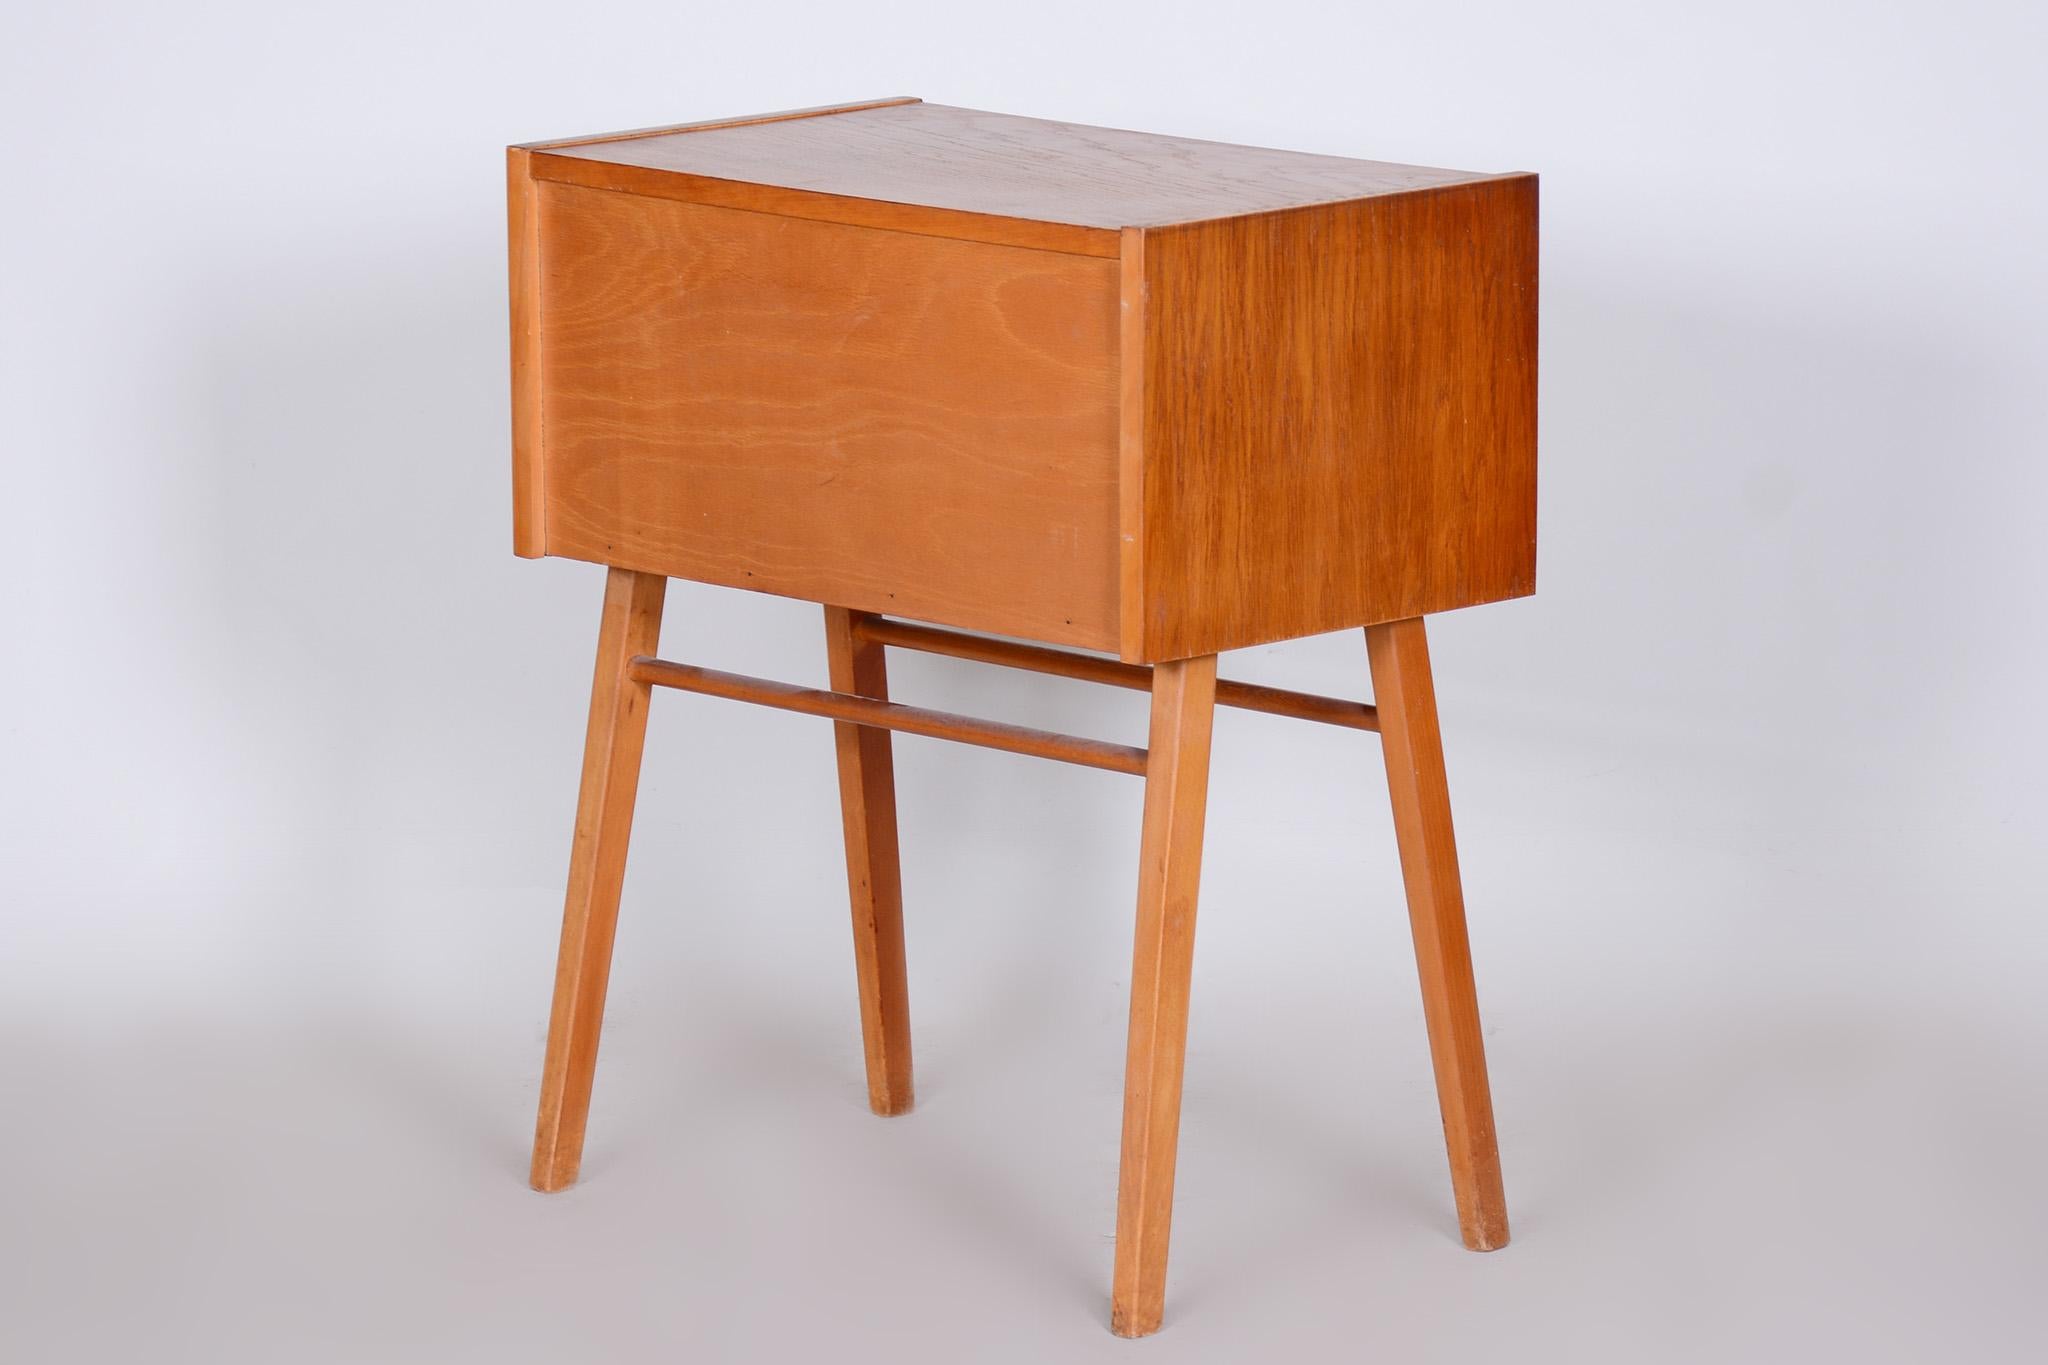 Czech Mid-Century Side Table, Cabinet Made Out of Oak, 1950s, Refreshed Polish For Sale 3